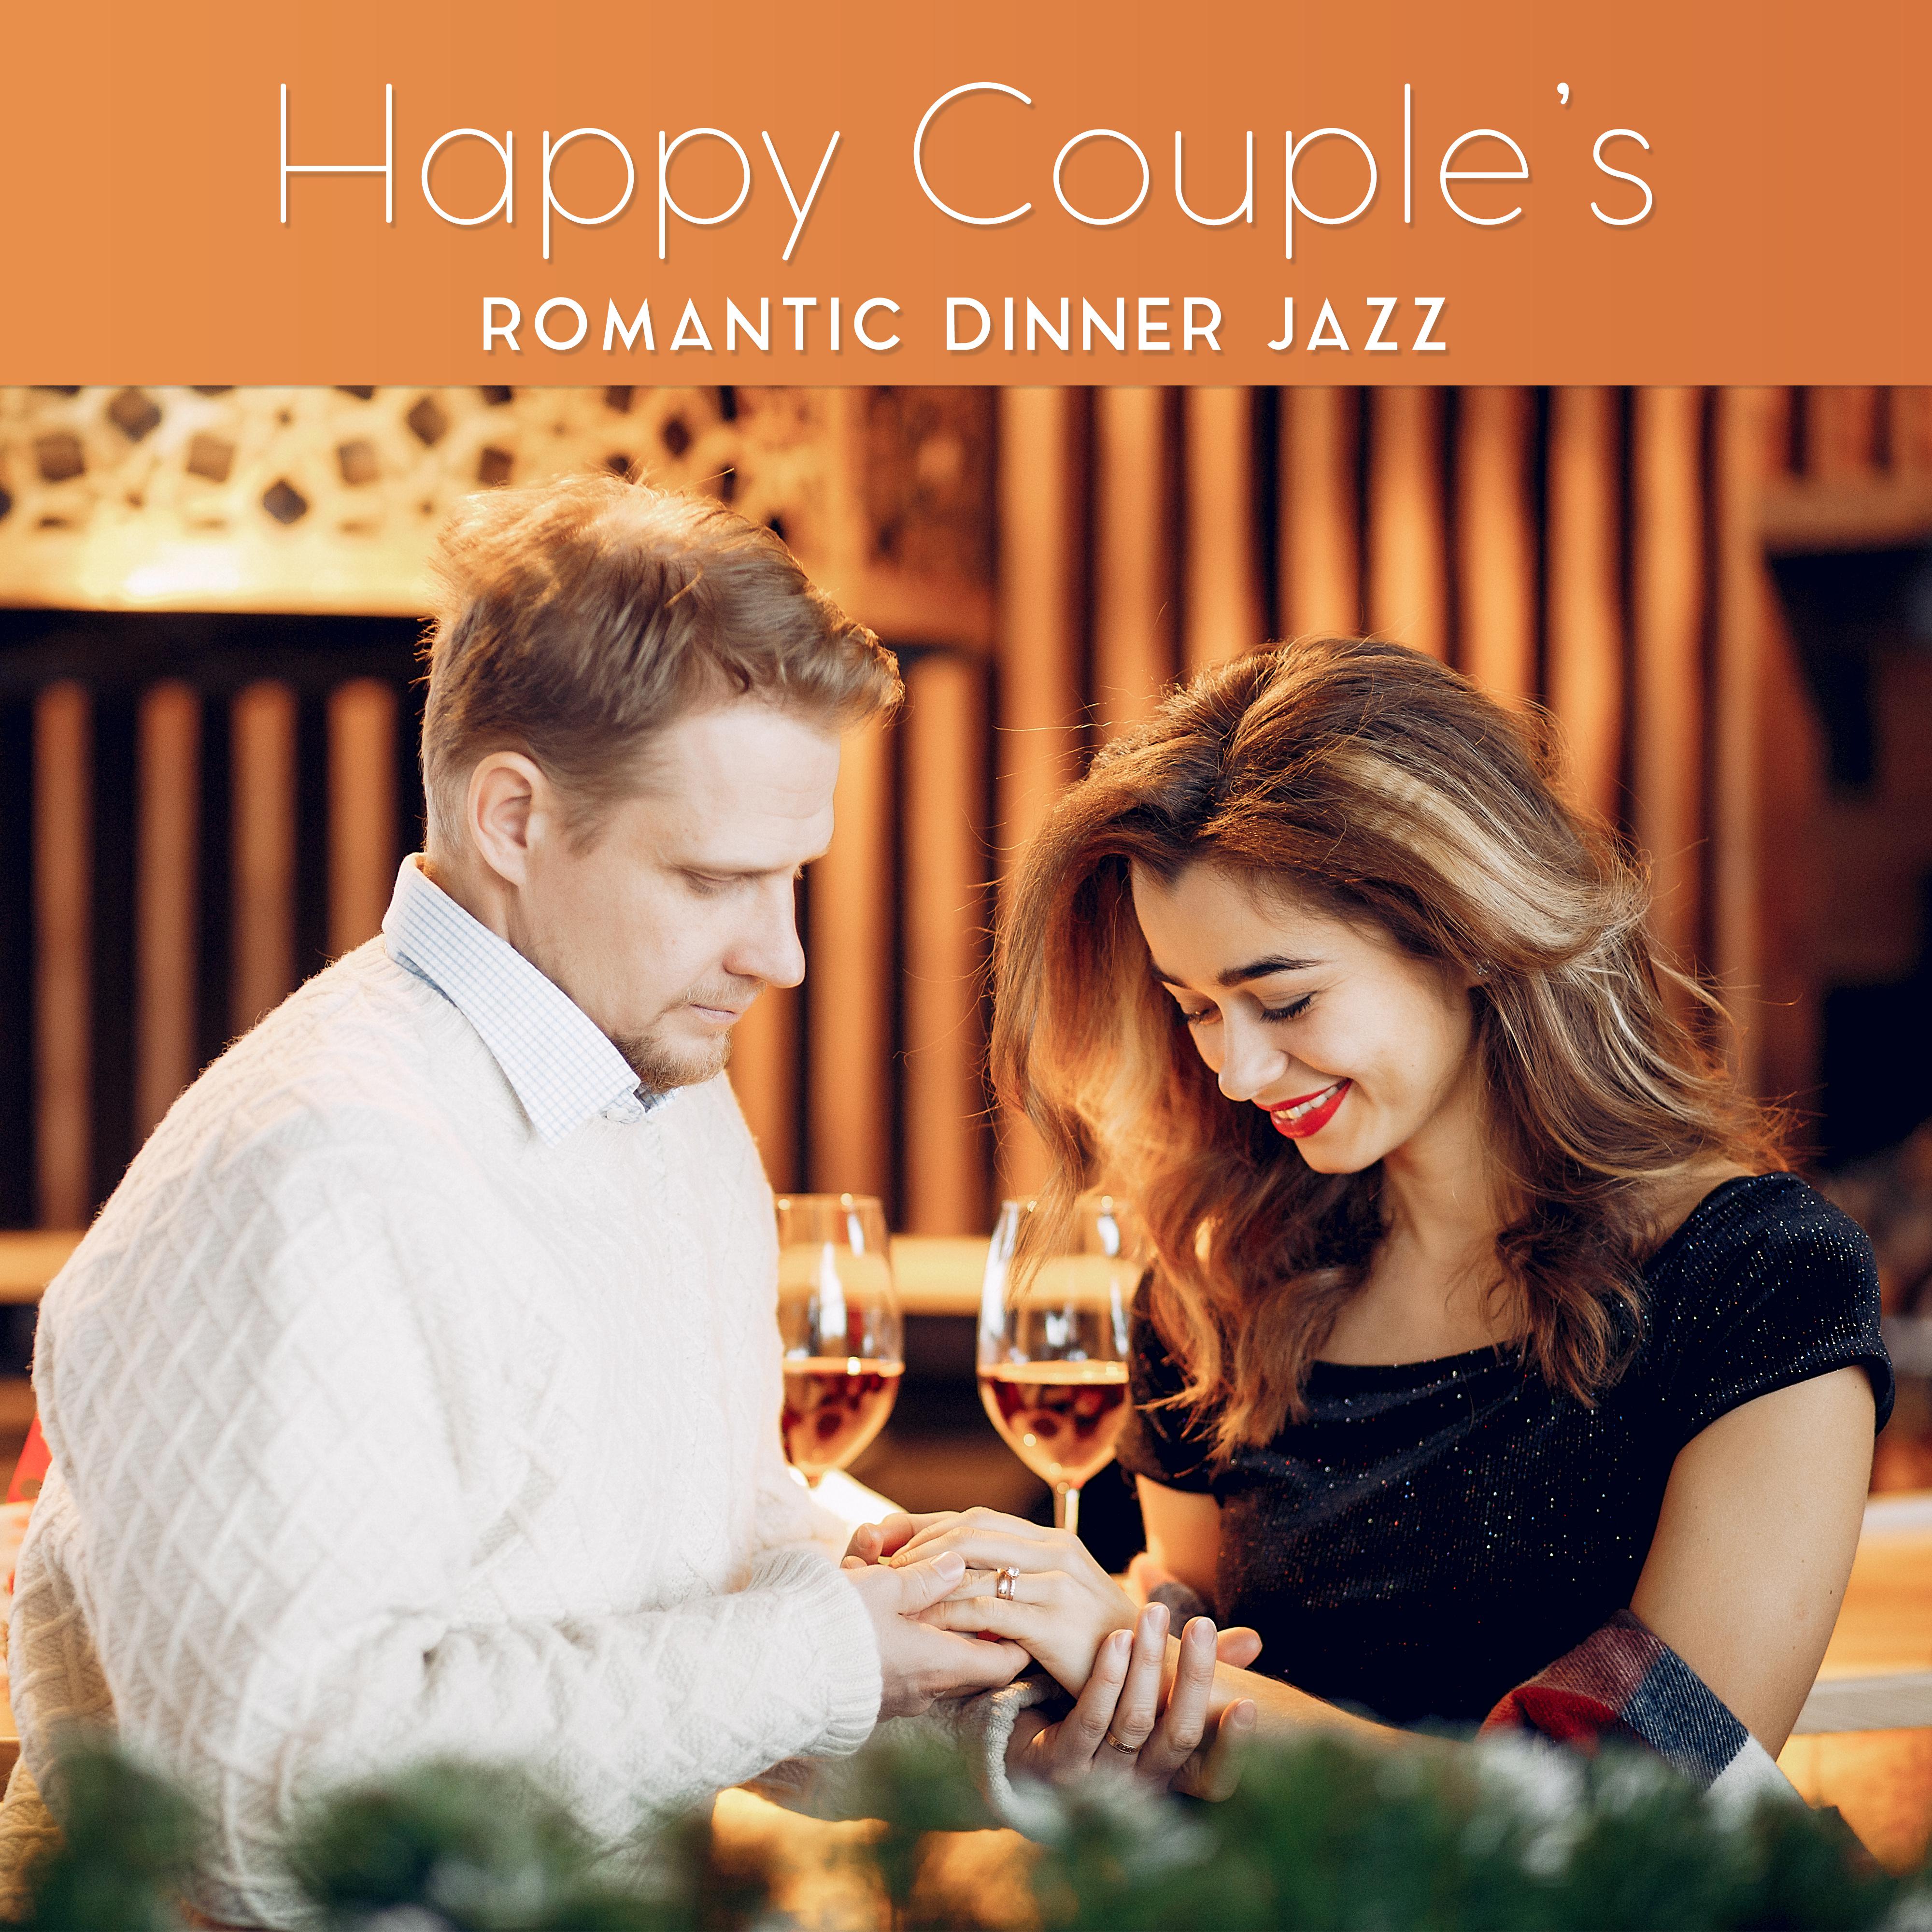 Happy Couple’s Romantic Dinner Jazz: 2019 Instrumental Smooth Jazz Music for Restaurant or Cafe Background, Songs for Romantic Time Spending Together, Vintage Sounds of Piano, Sax, Trumpet & More